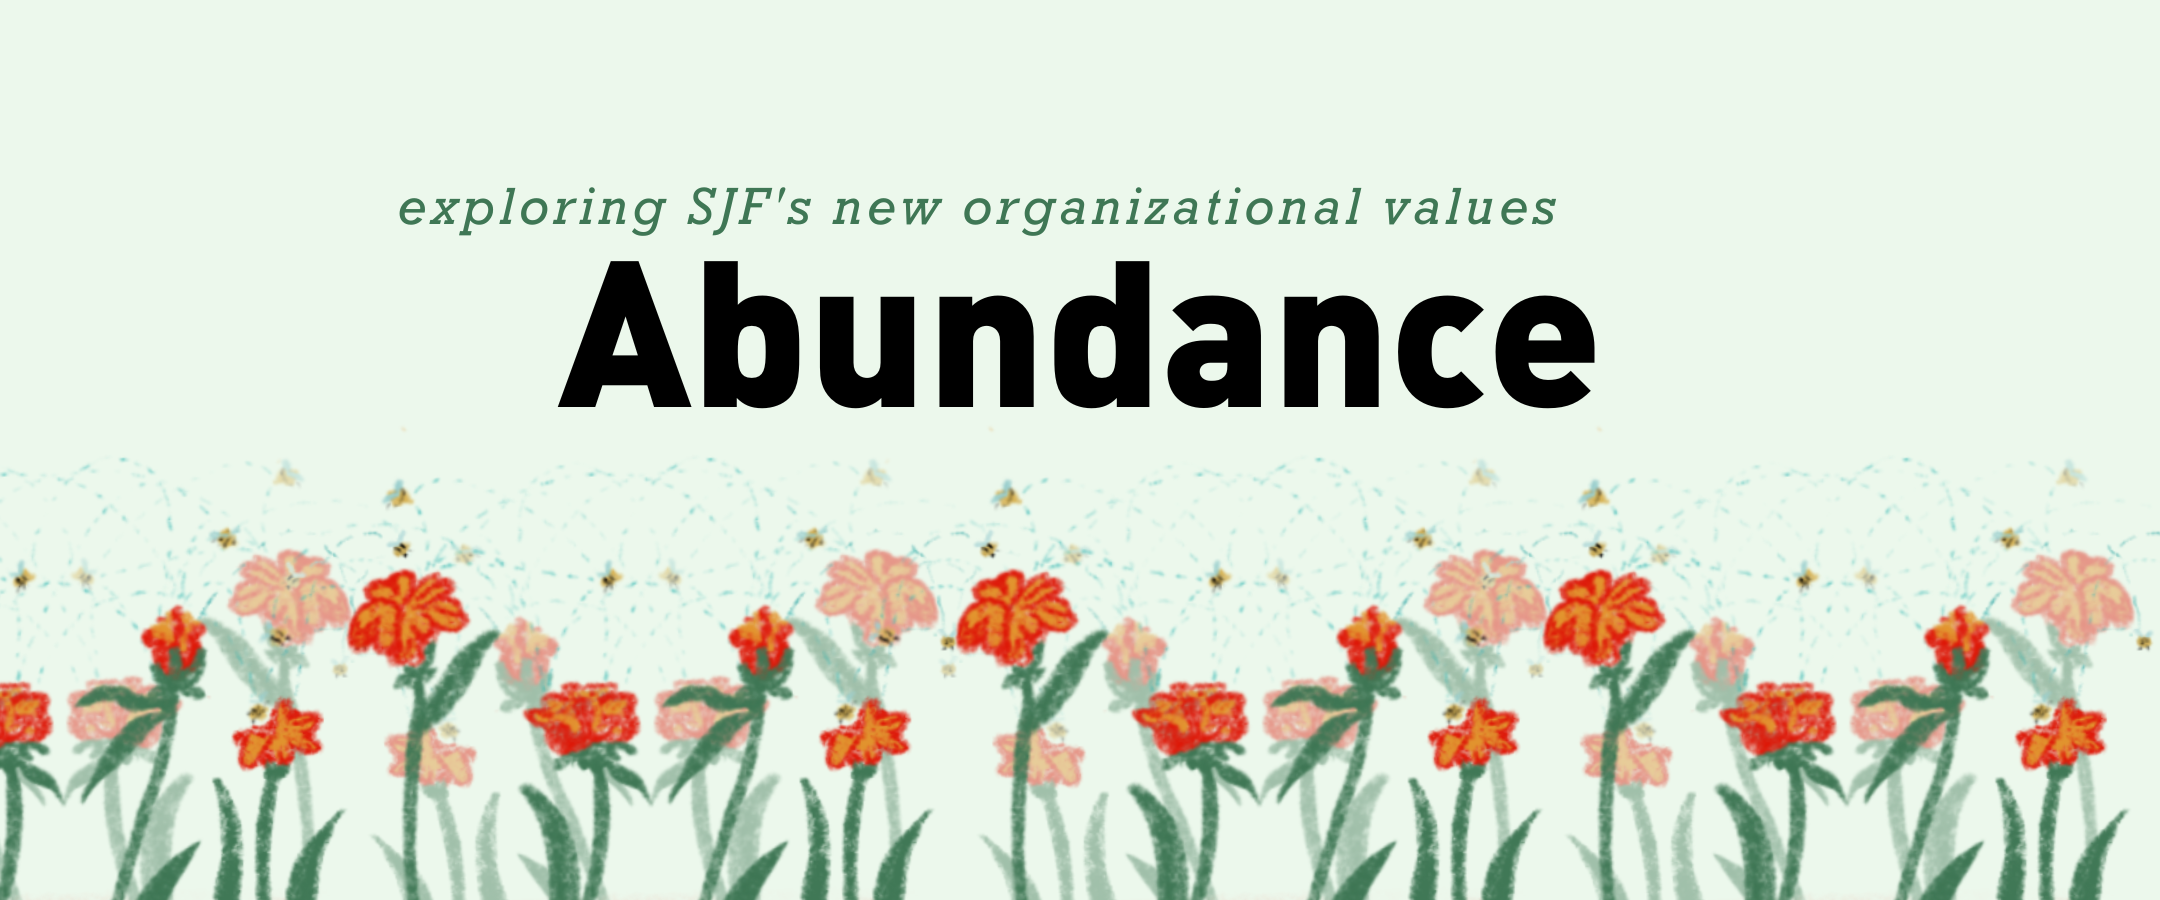 Rectangular banner image with light green background and illustration of red flowers across the bottom. Black text reads Exploring SJFs new organizational values. Abundance